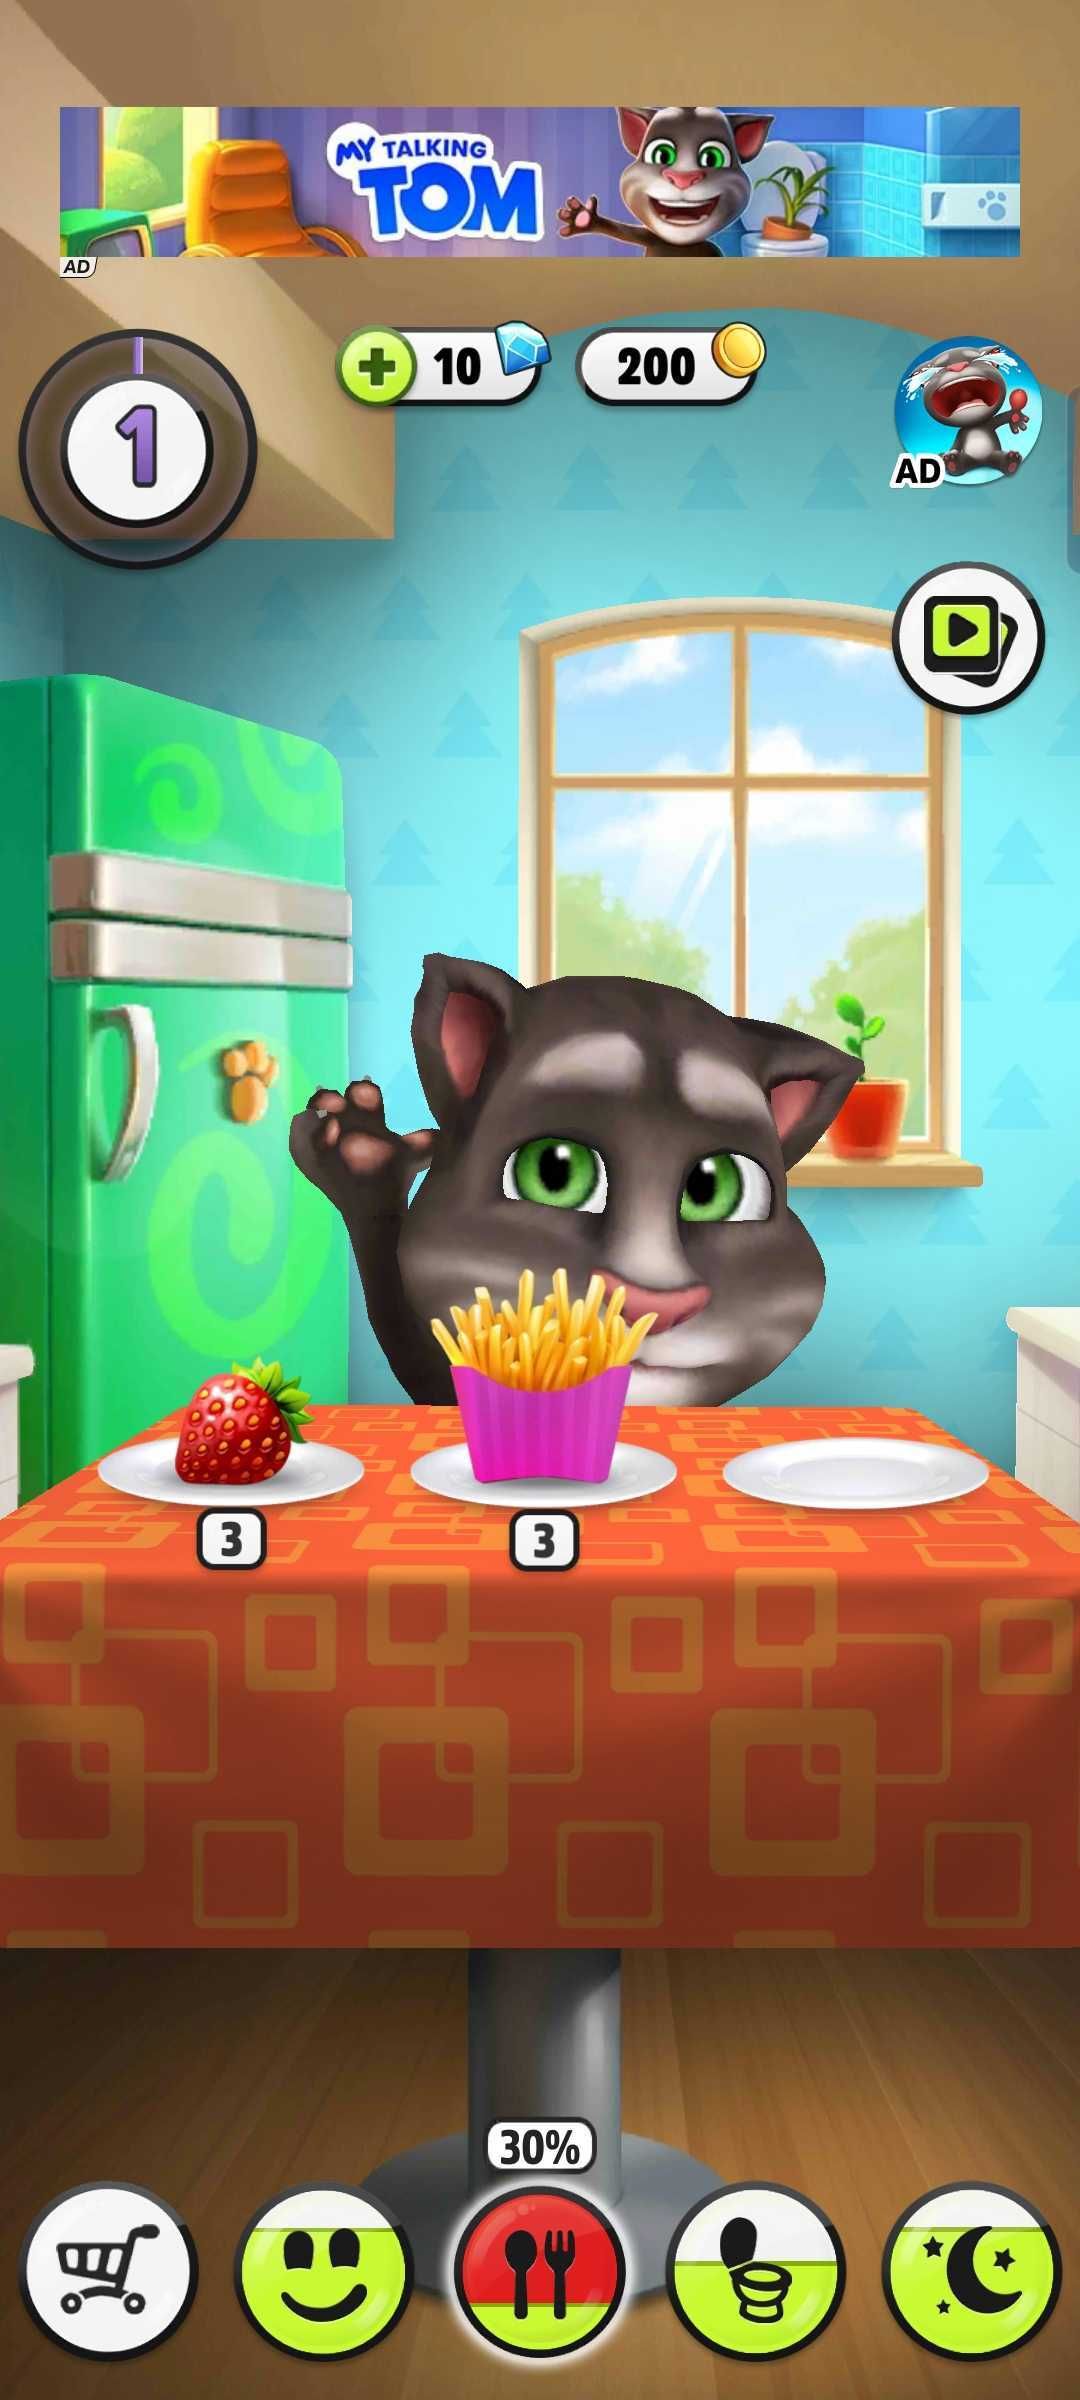 Food section in My Talking Tom